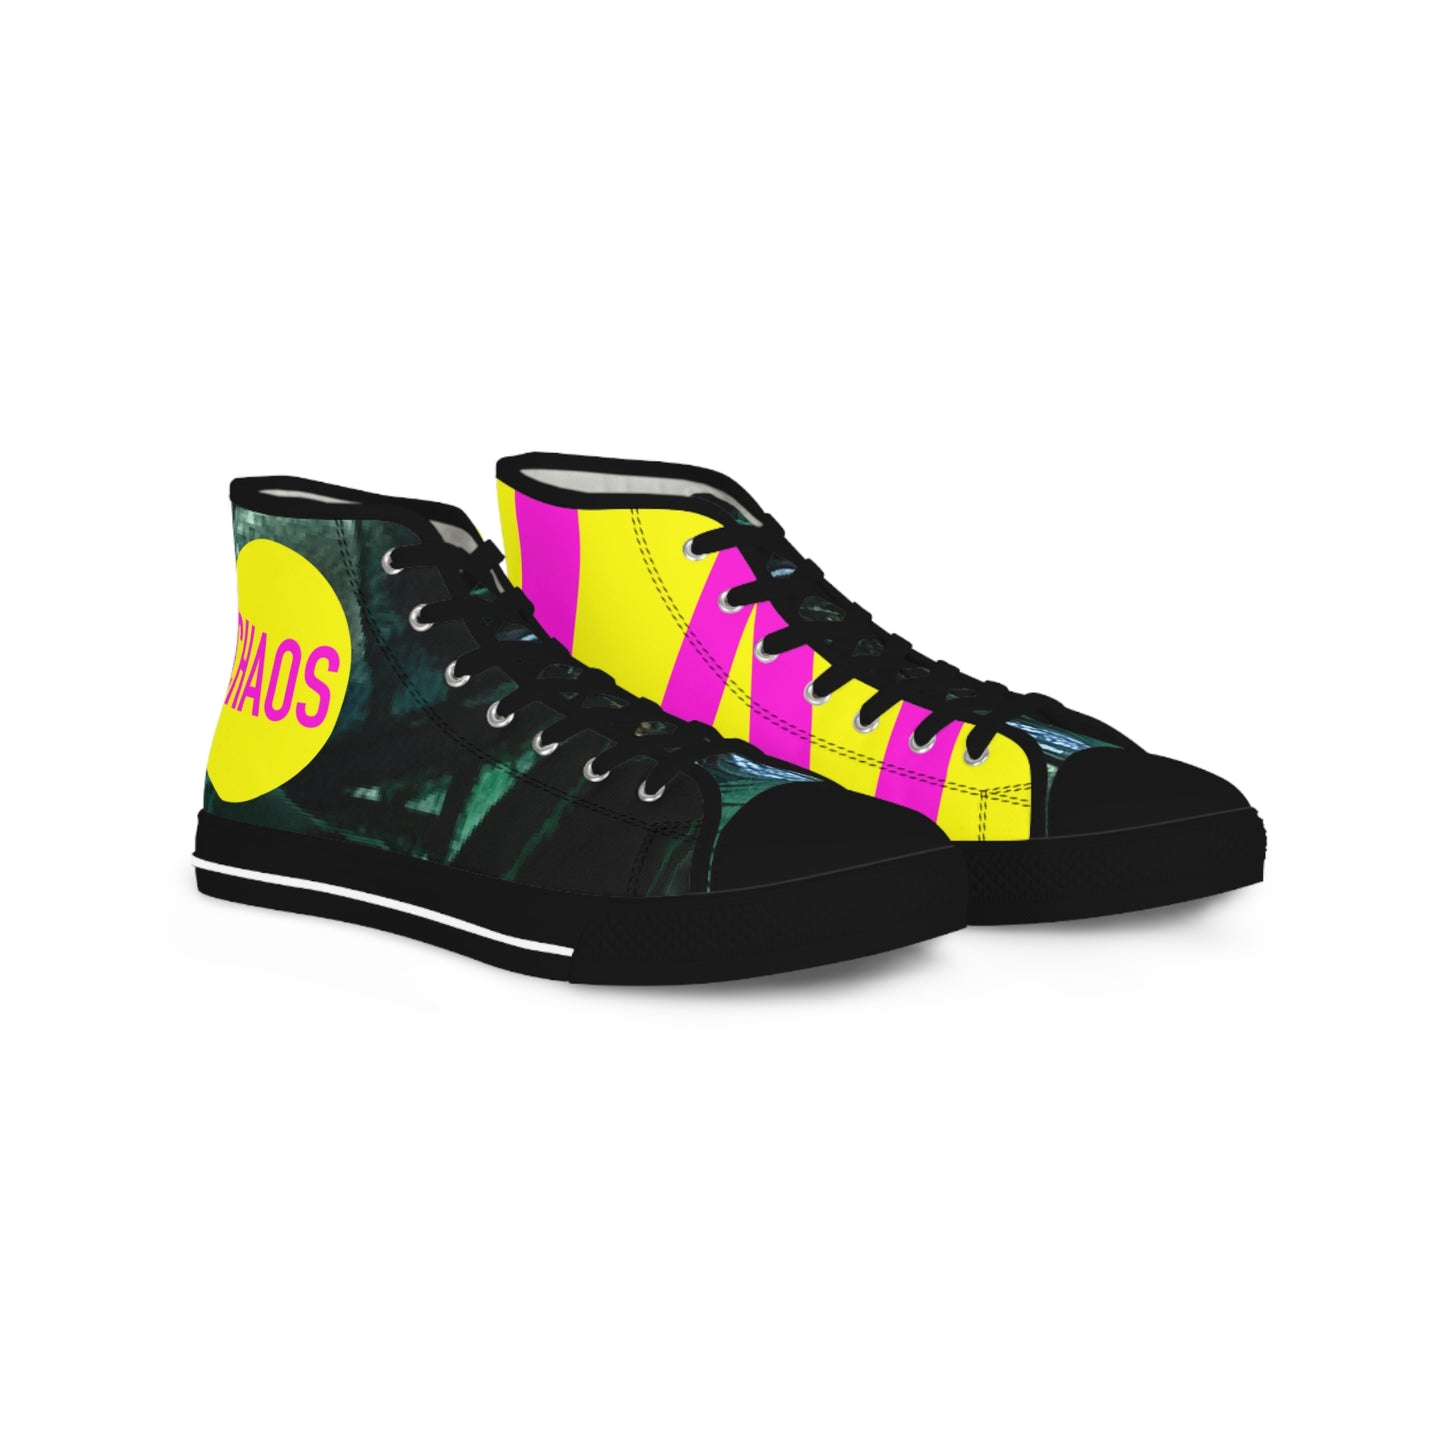 Limited Edition High Top Sneakers - CHAOS - Pink